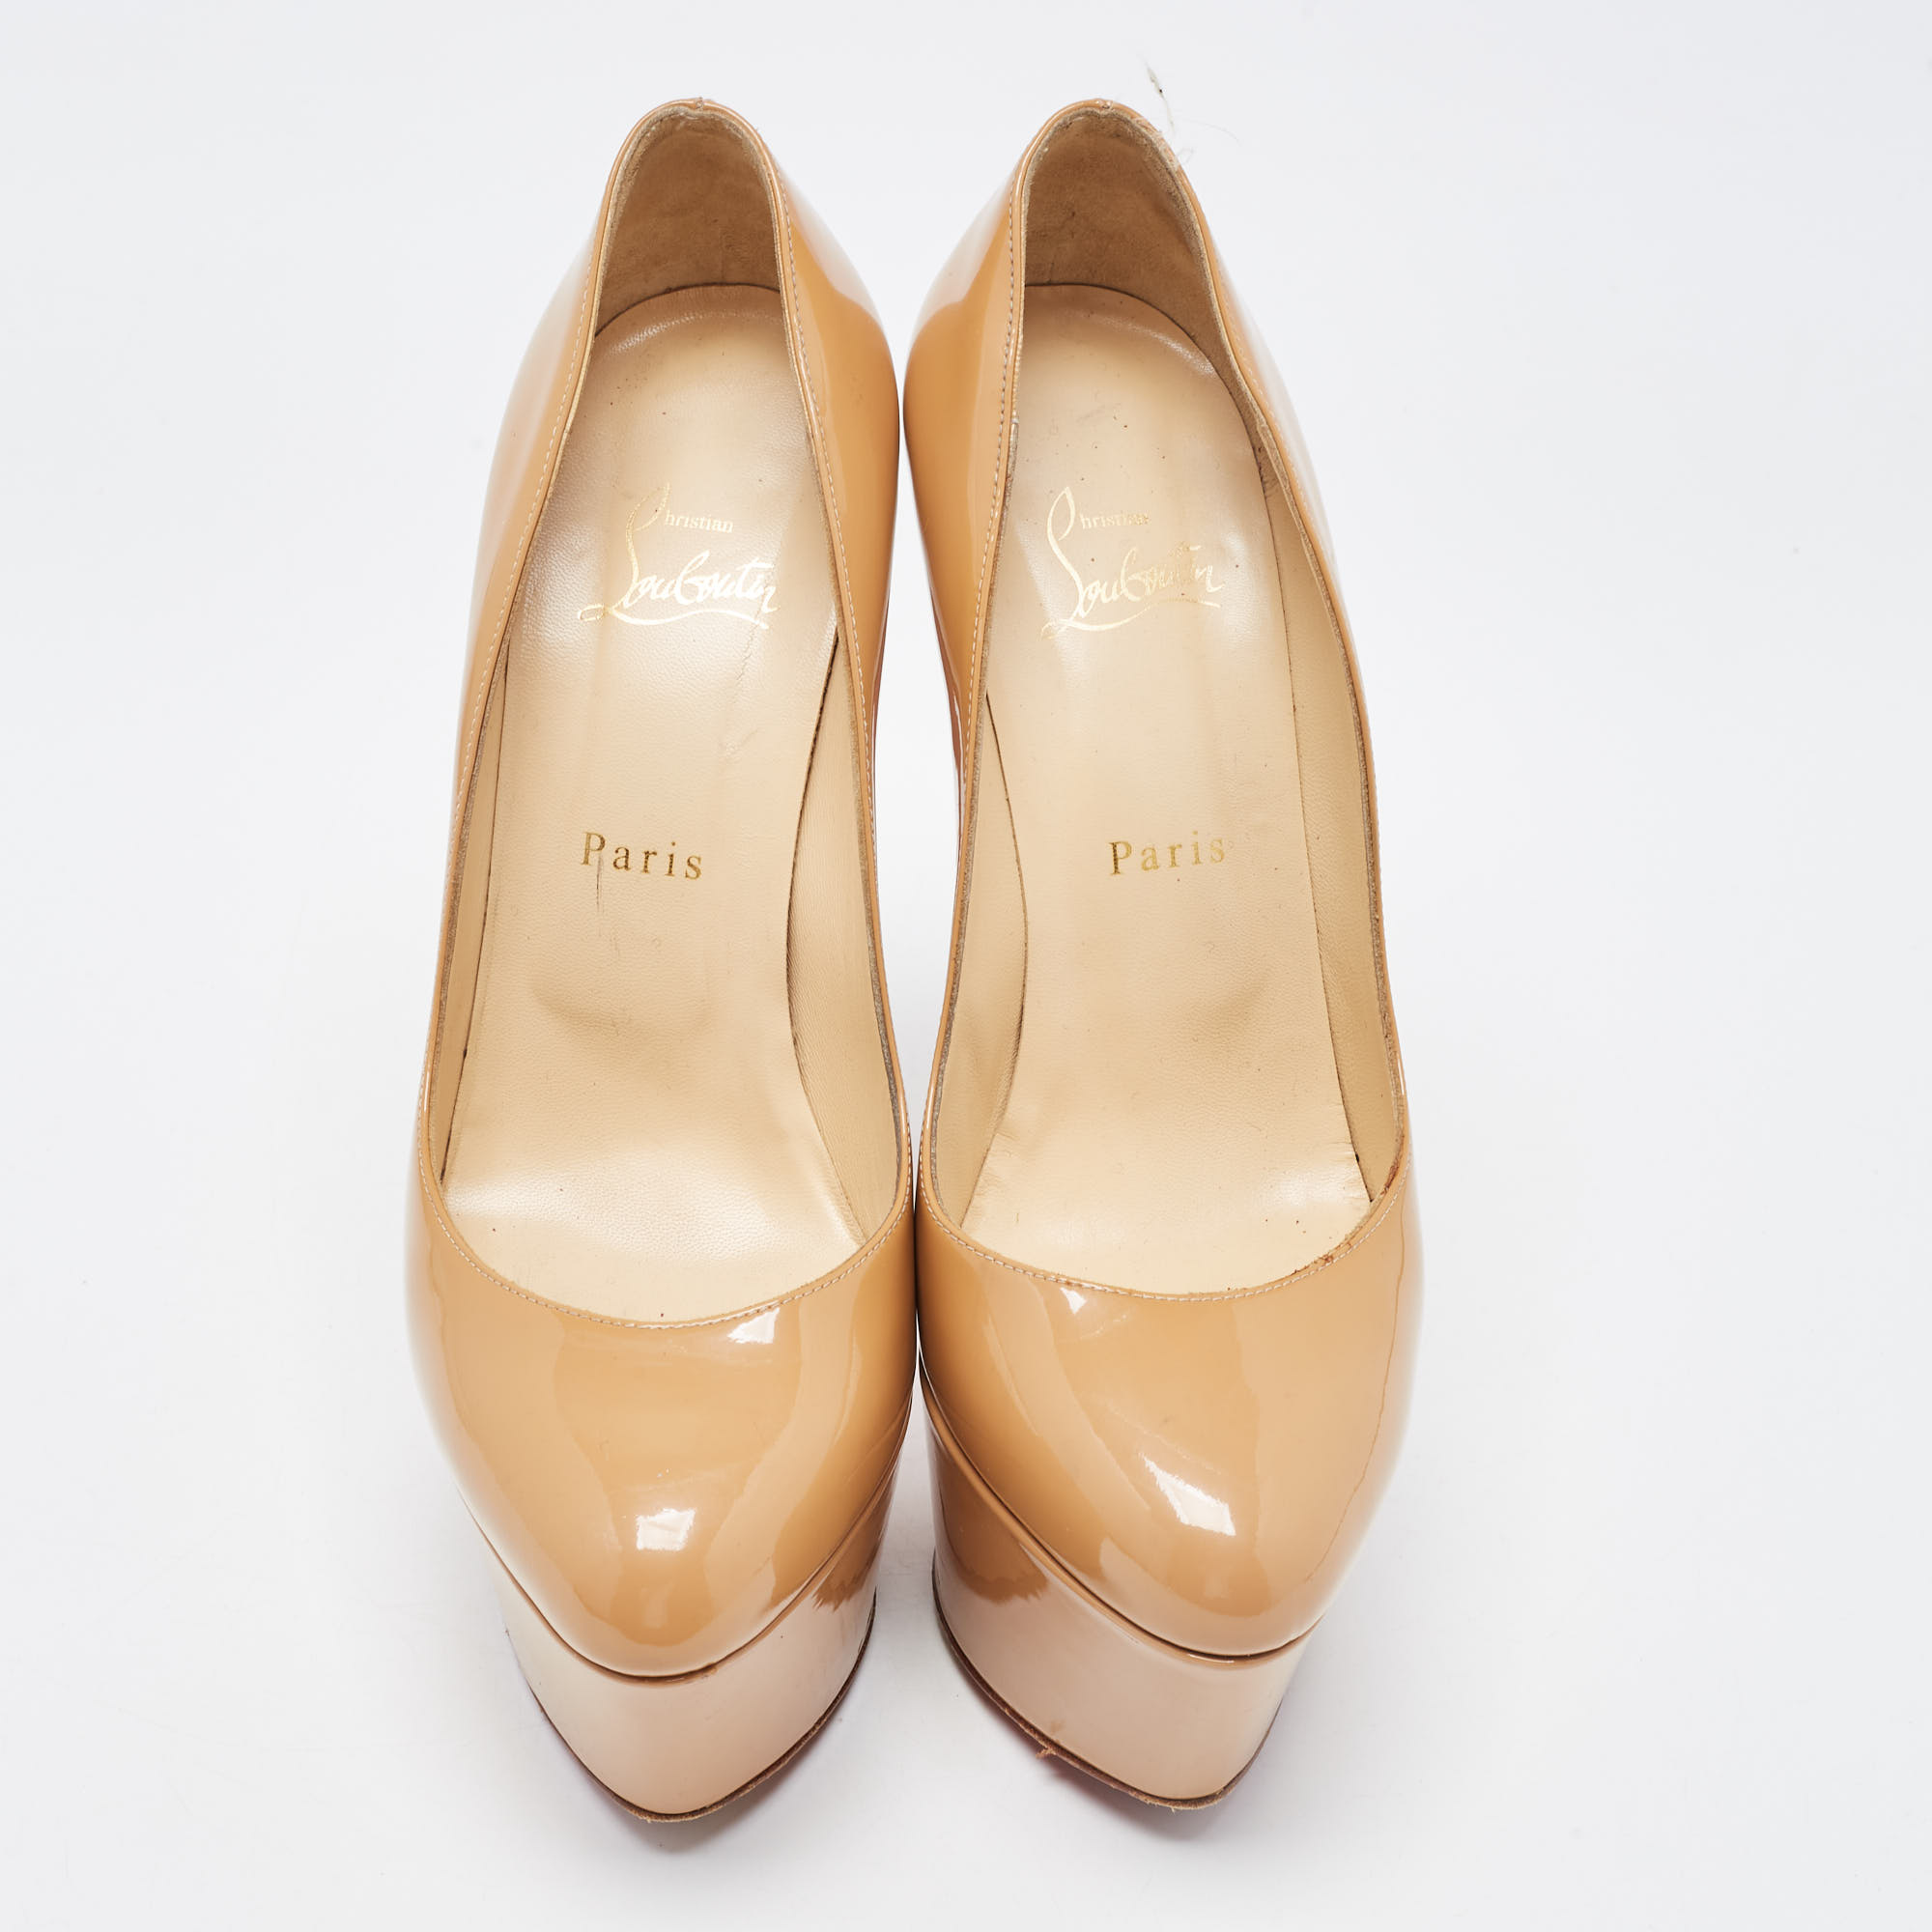 Christian Louboutin Beige Patent Leather Victoria Pumps Size 40